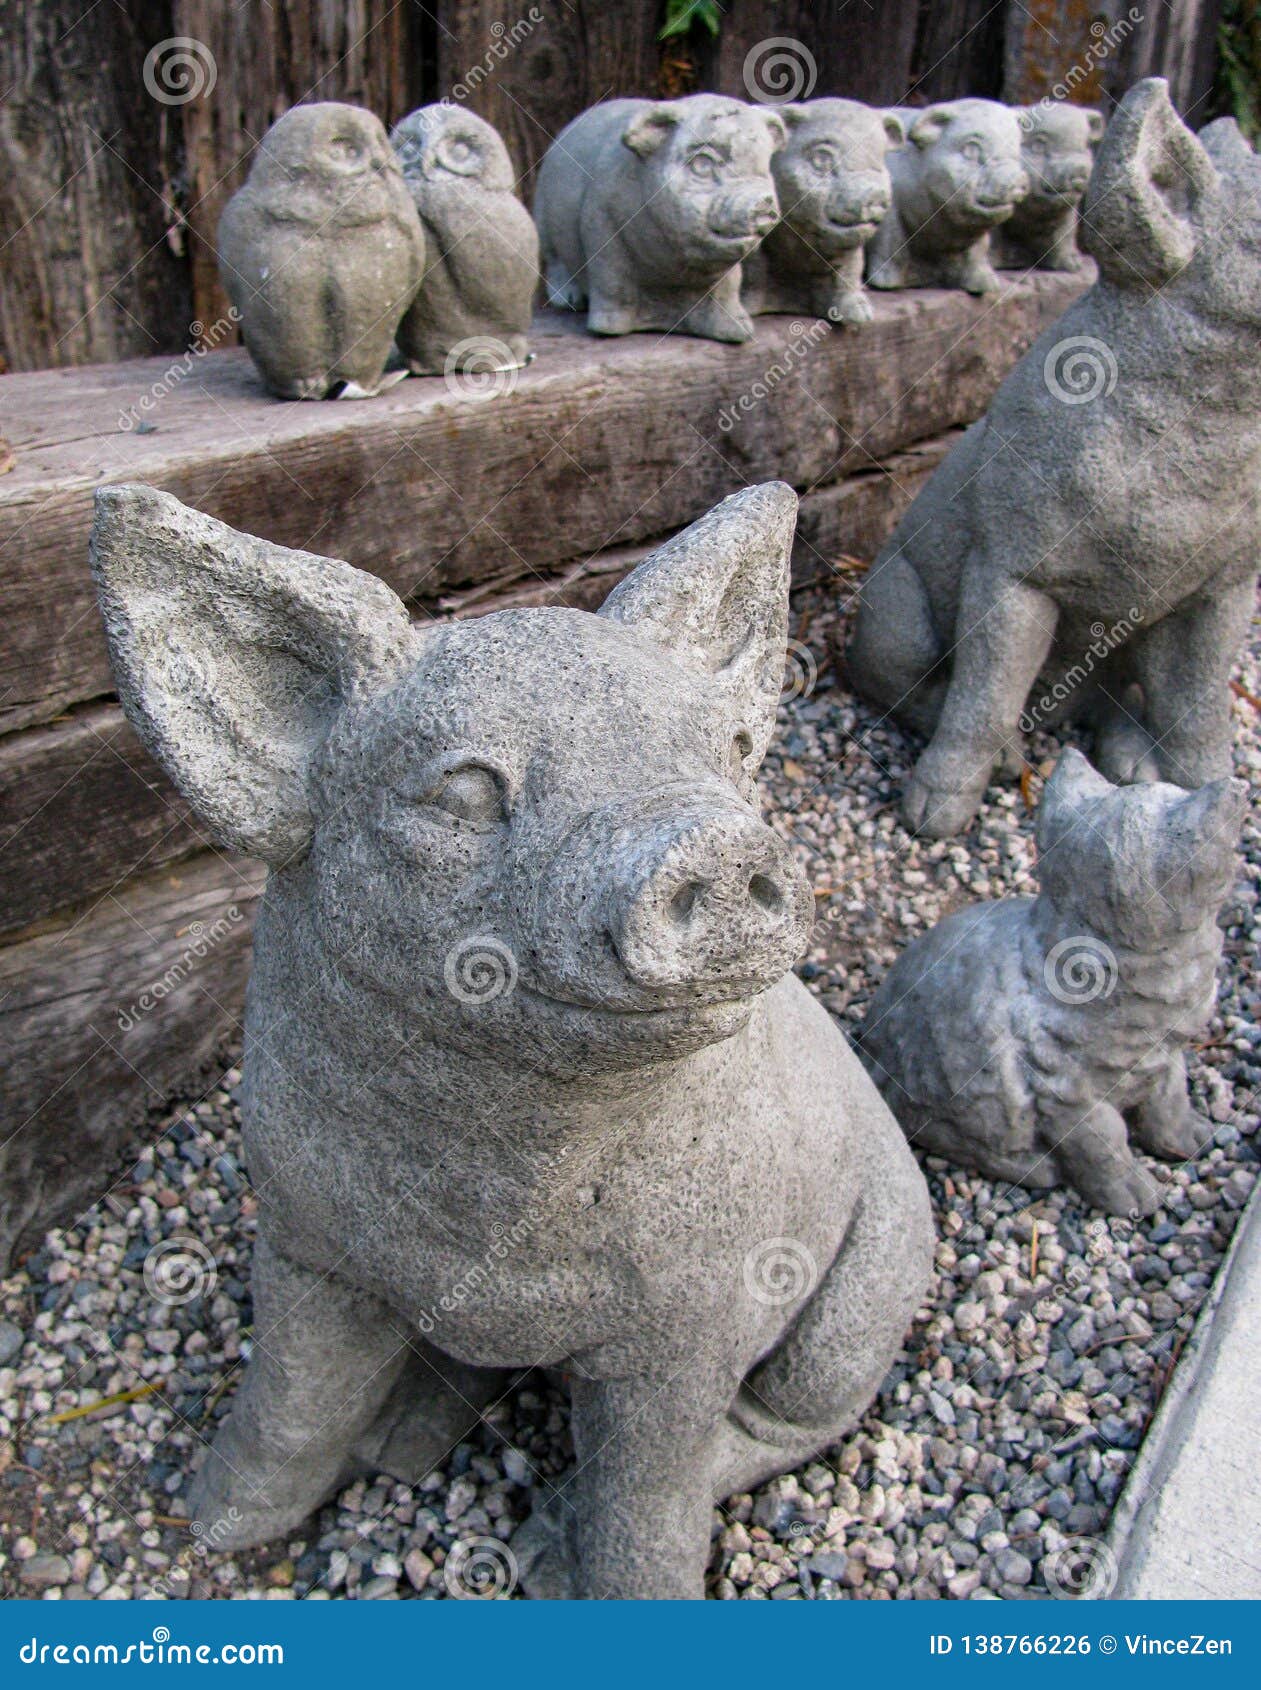 Cute Baby Pig Leads Fun Lineup of Stone Garden Animals Stock Photo - Image  of baby, sculpture: 138766226